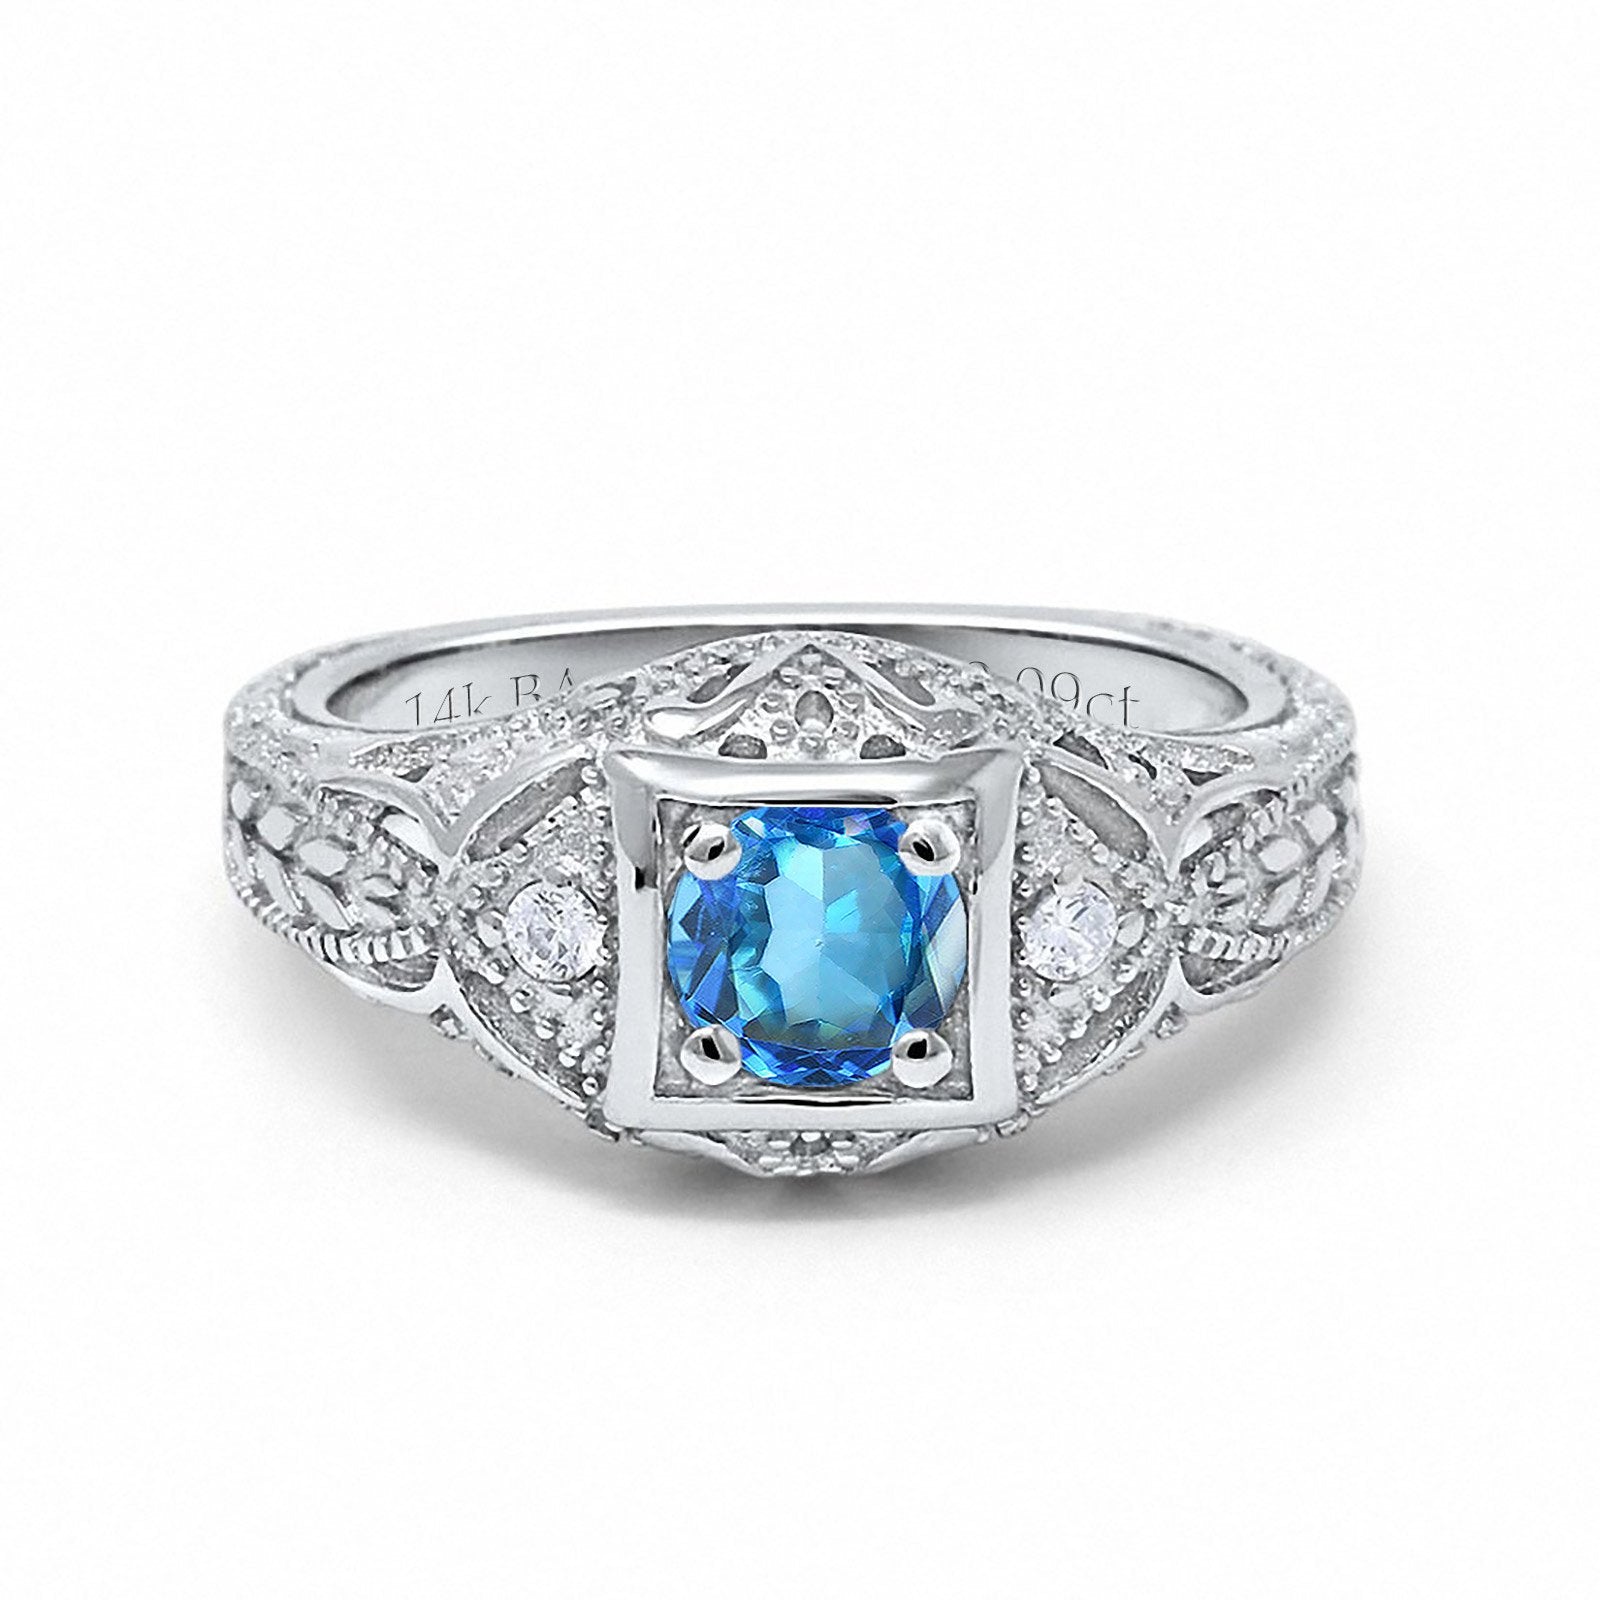 14K White Gold 0.15ct Round Antique Style 5mm G SI Natural Blue Topaz Diamond Engagement Wedding Ring Size 6.5